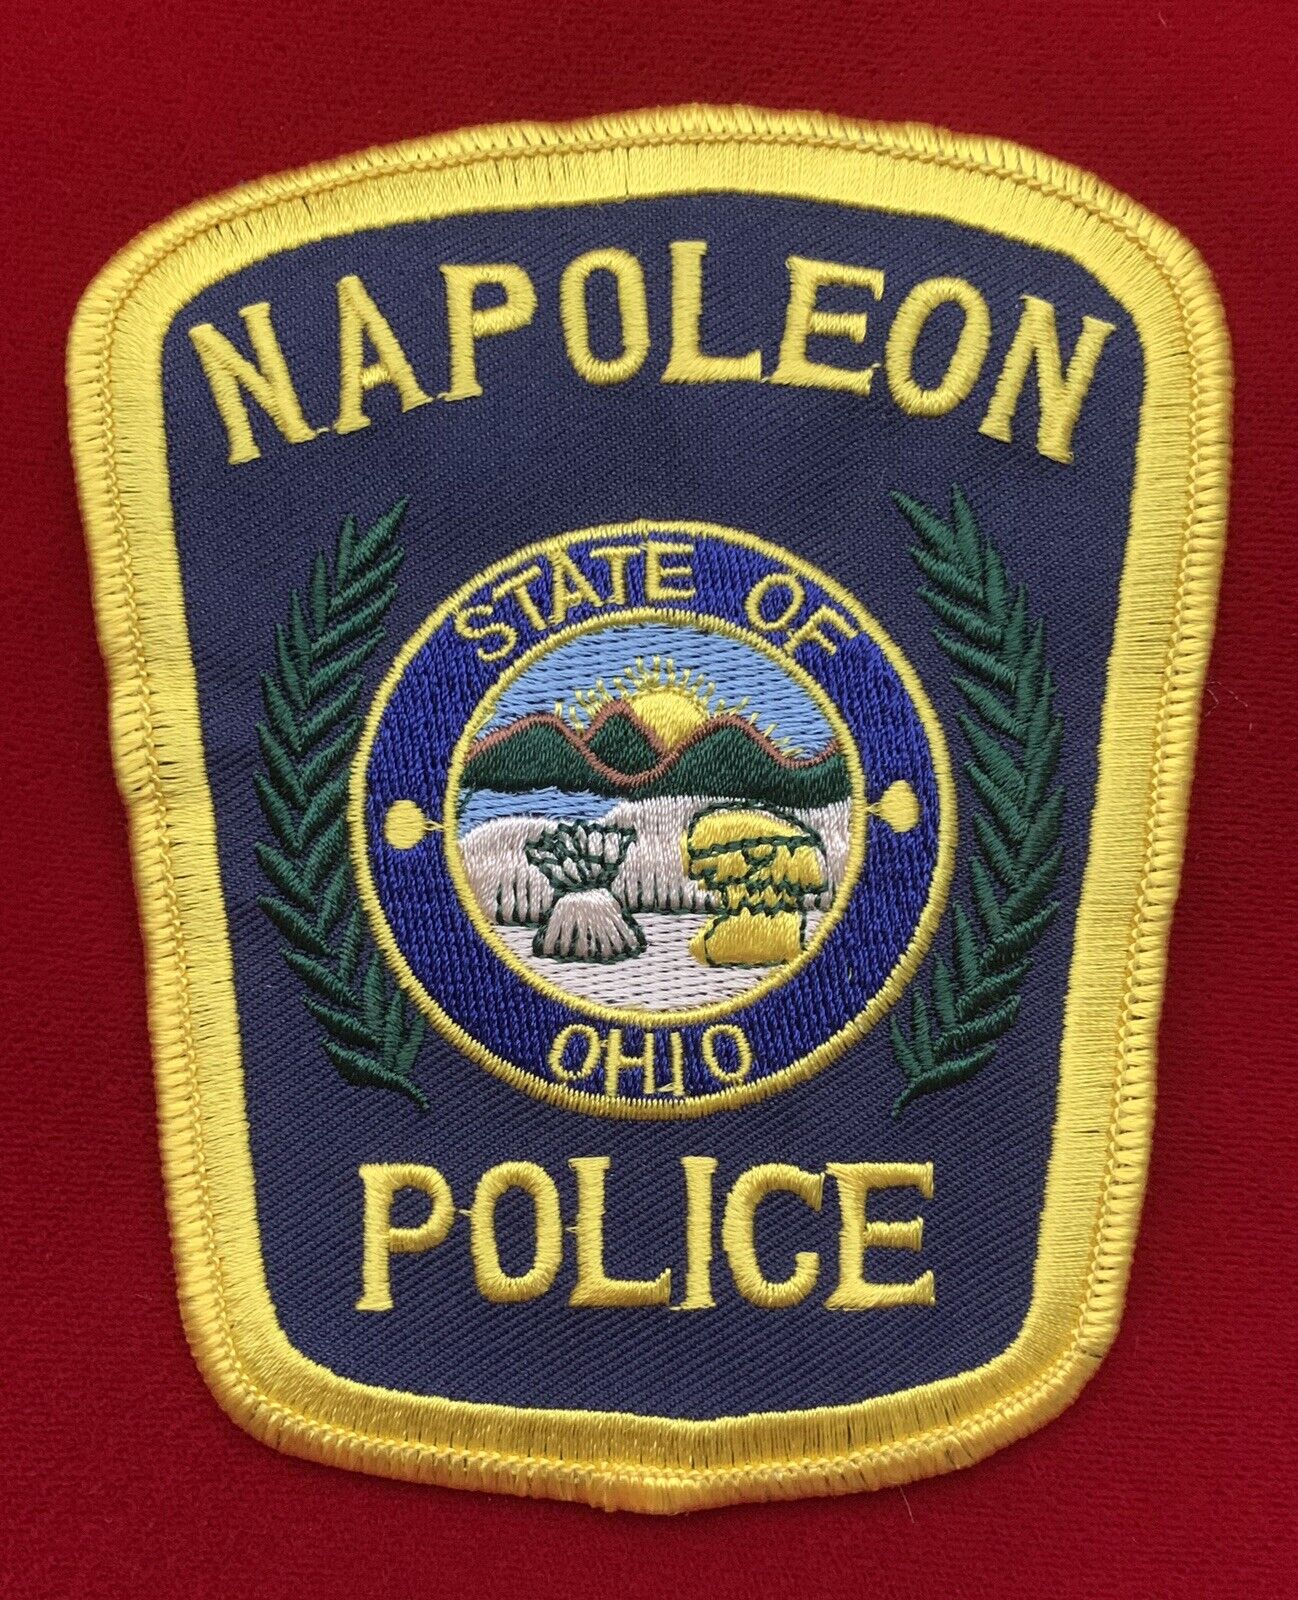 Napoleon Police Collectible Patch, Yellow Border, County Seat of Henry Co. Ohio